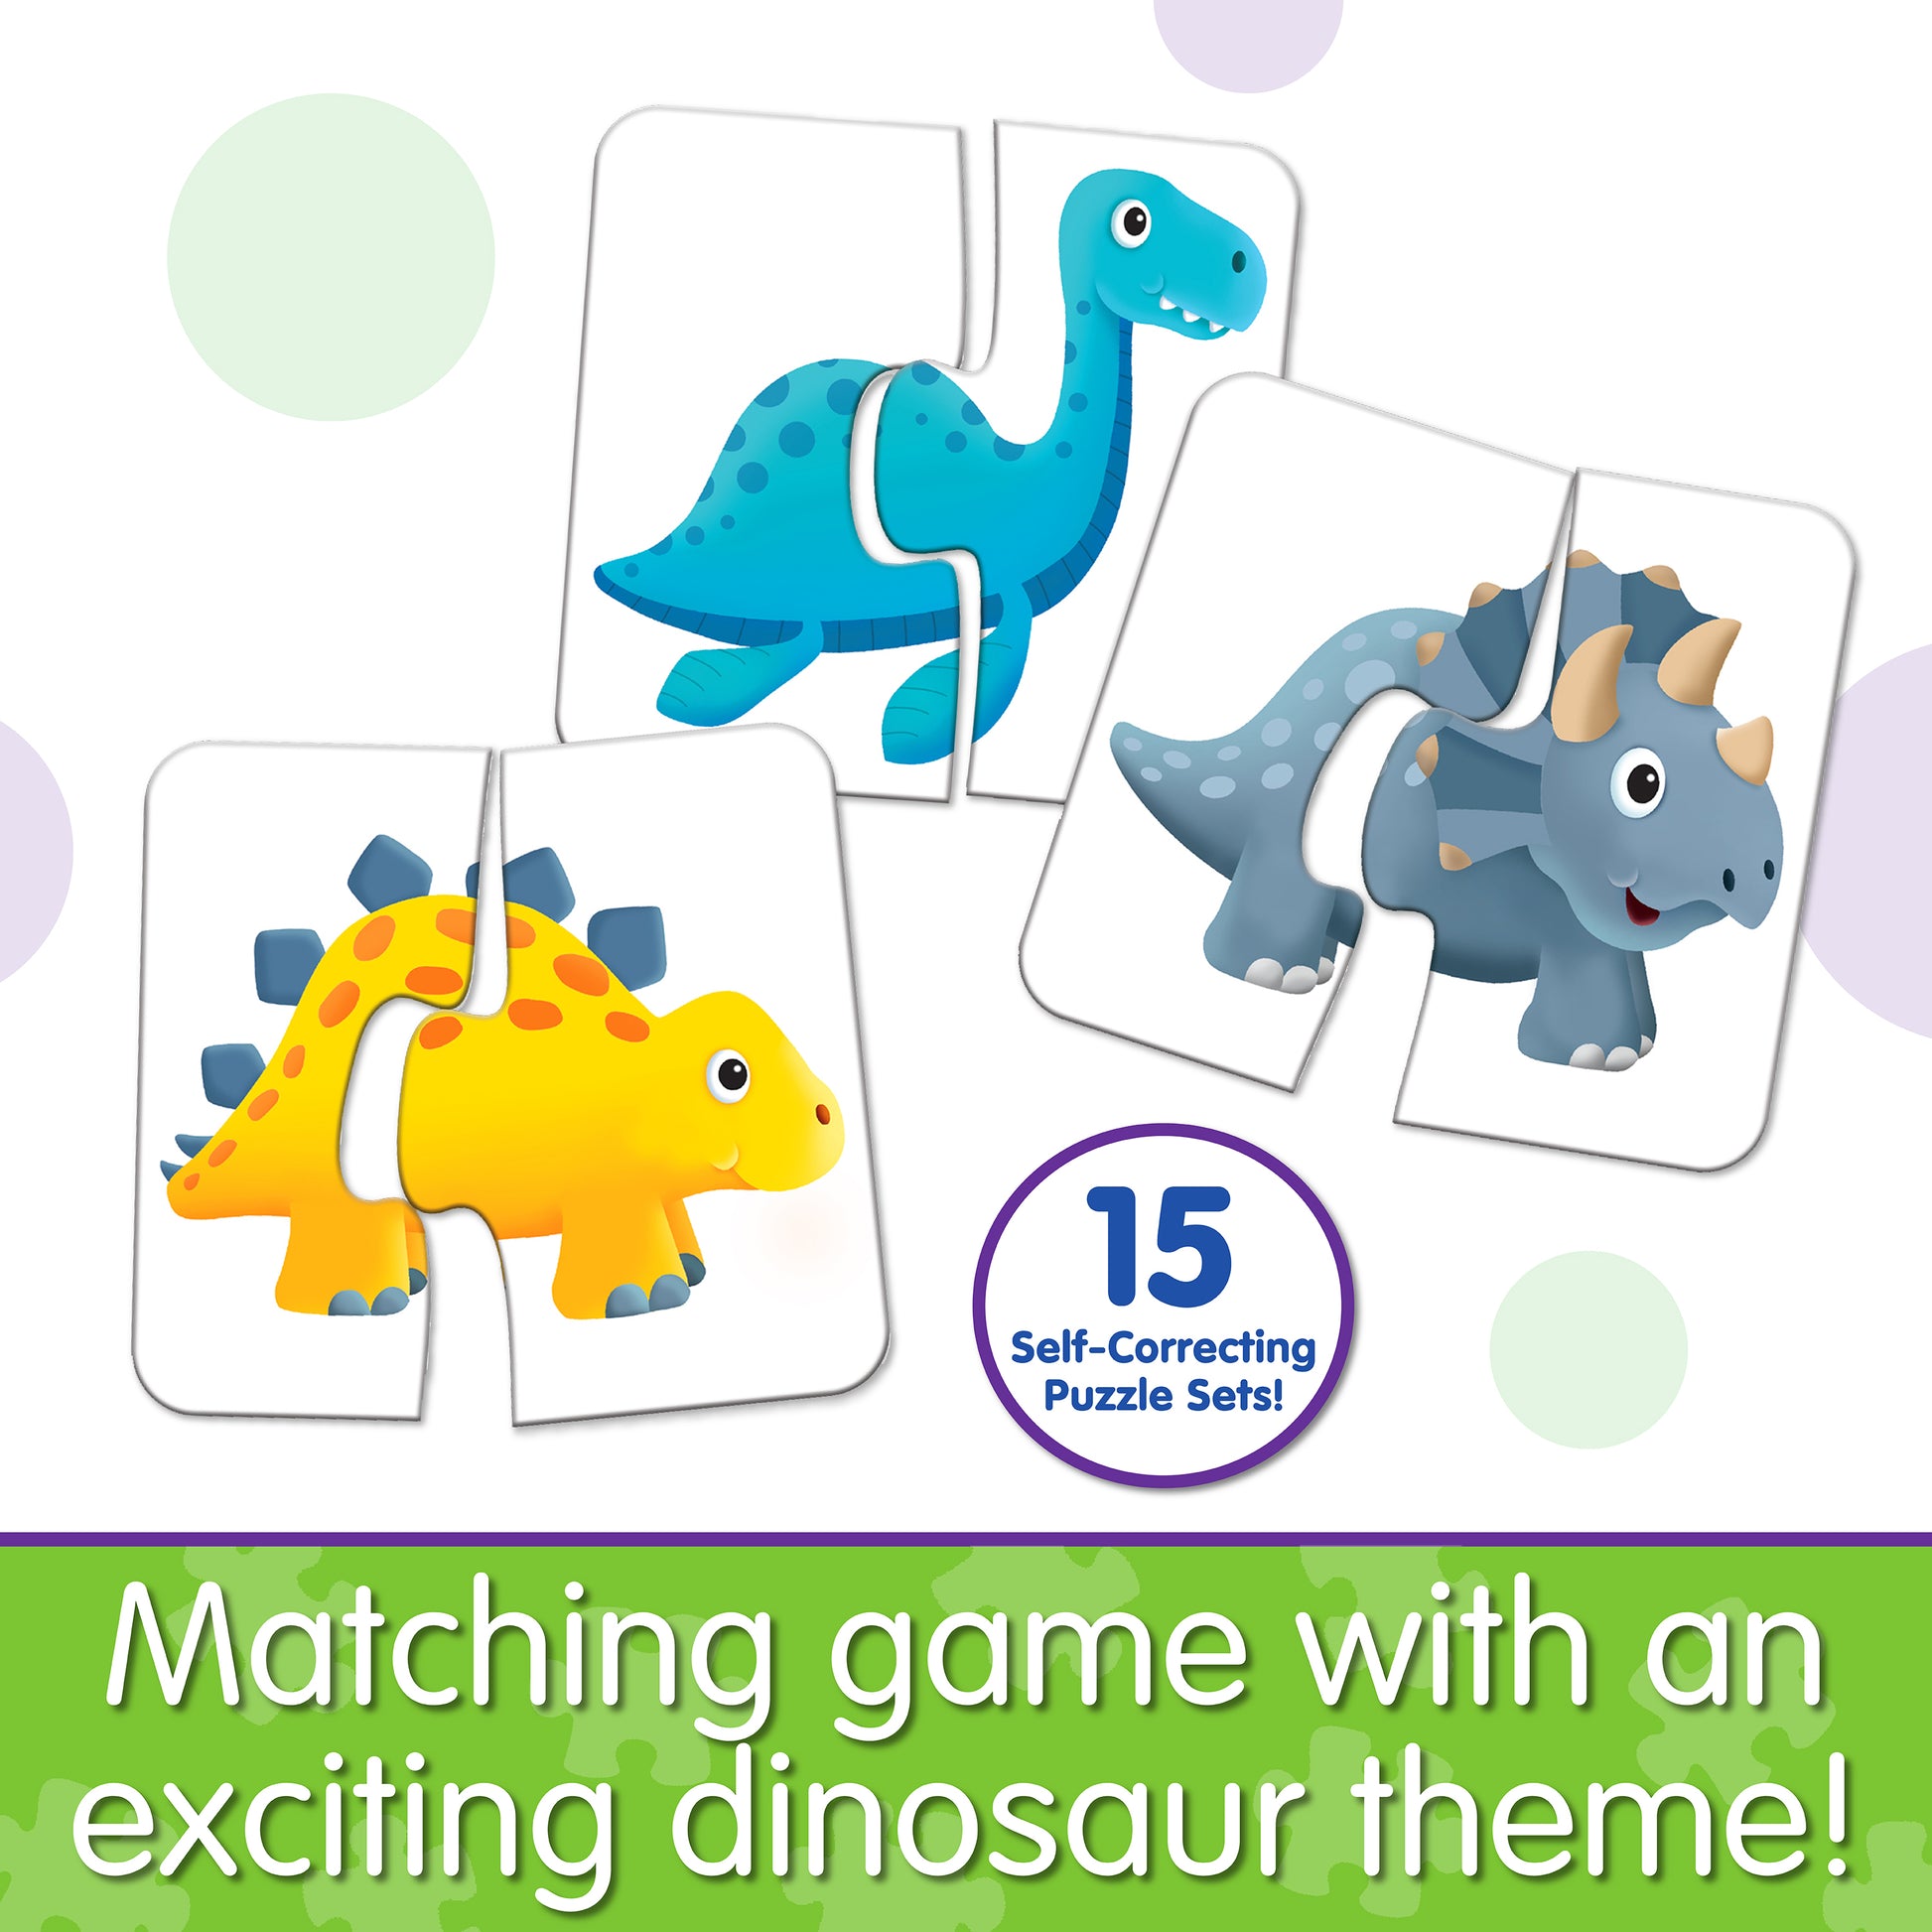 Infographic about My First Match It - Dinosaur Friends that says, "Matching game with an exciting dinosaur theme!"